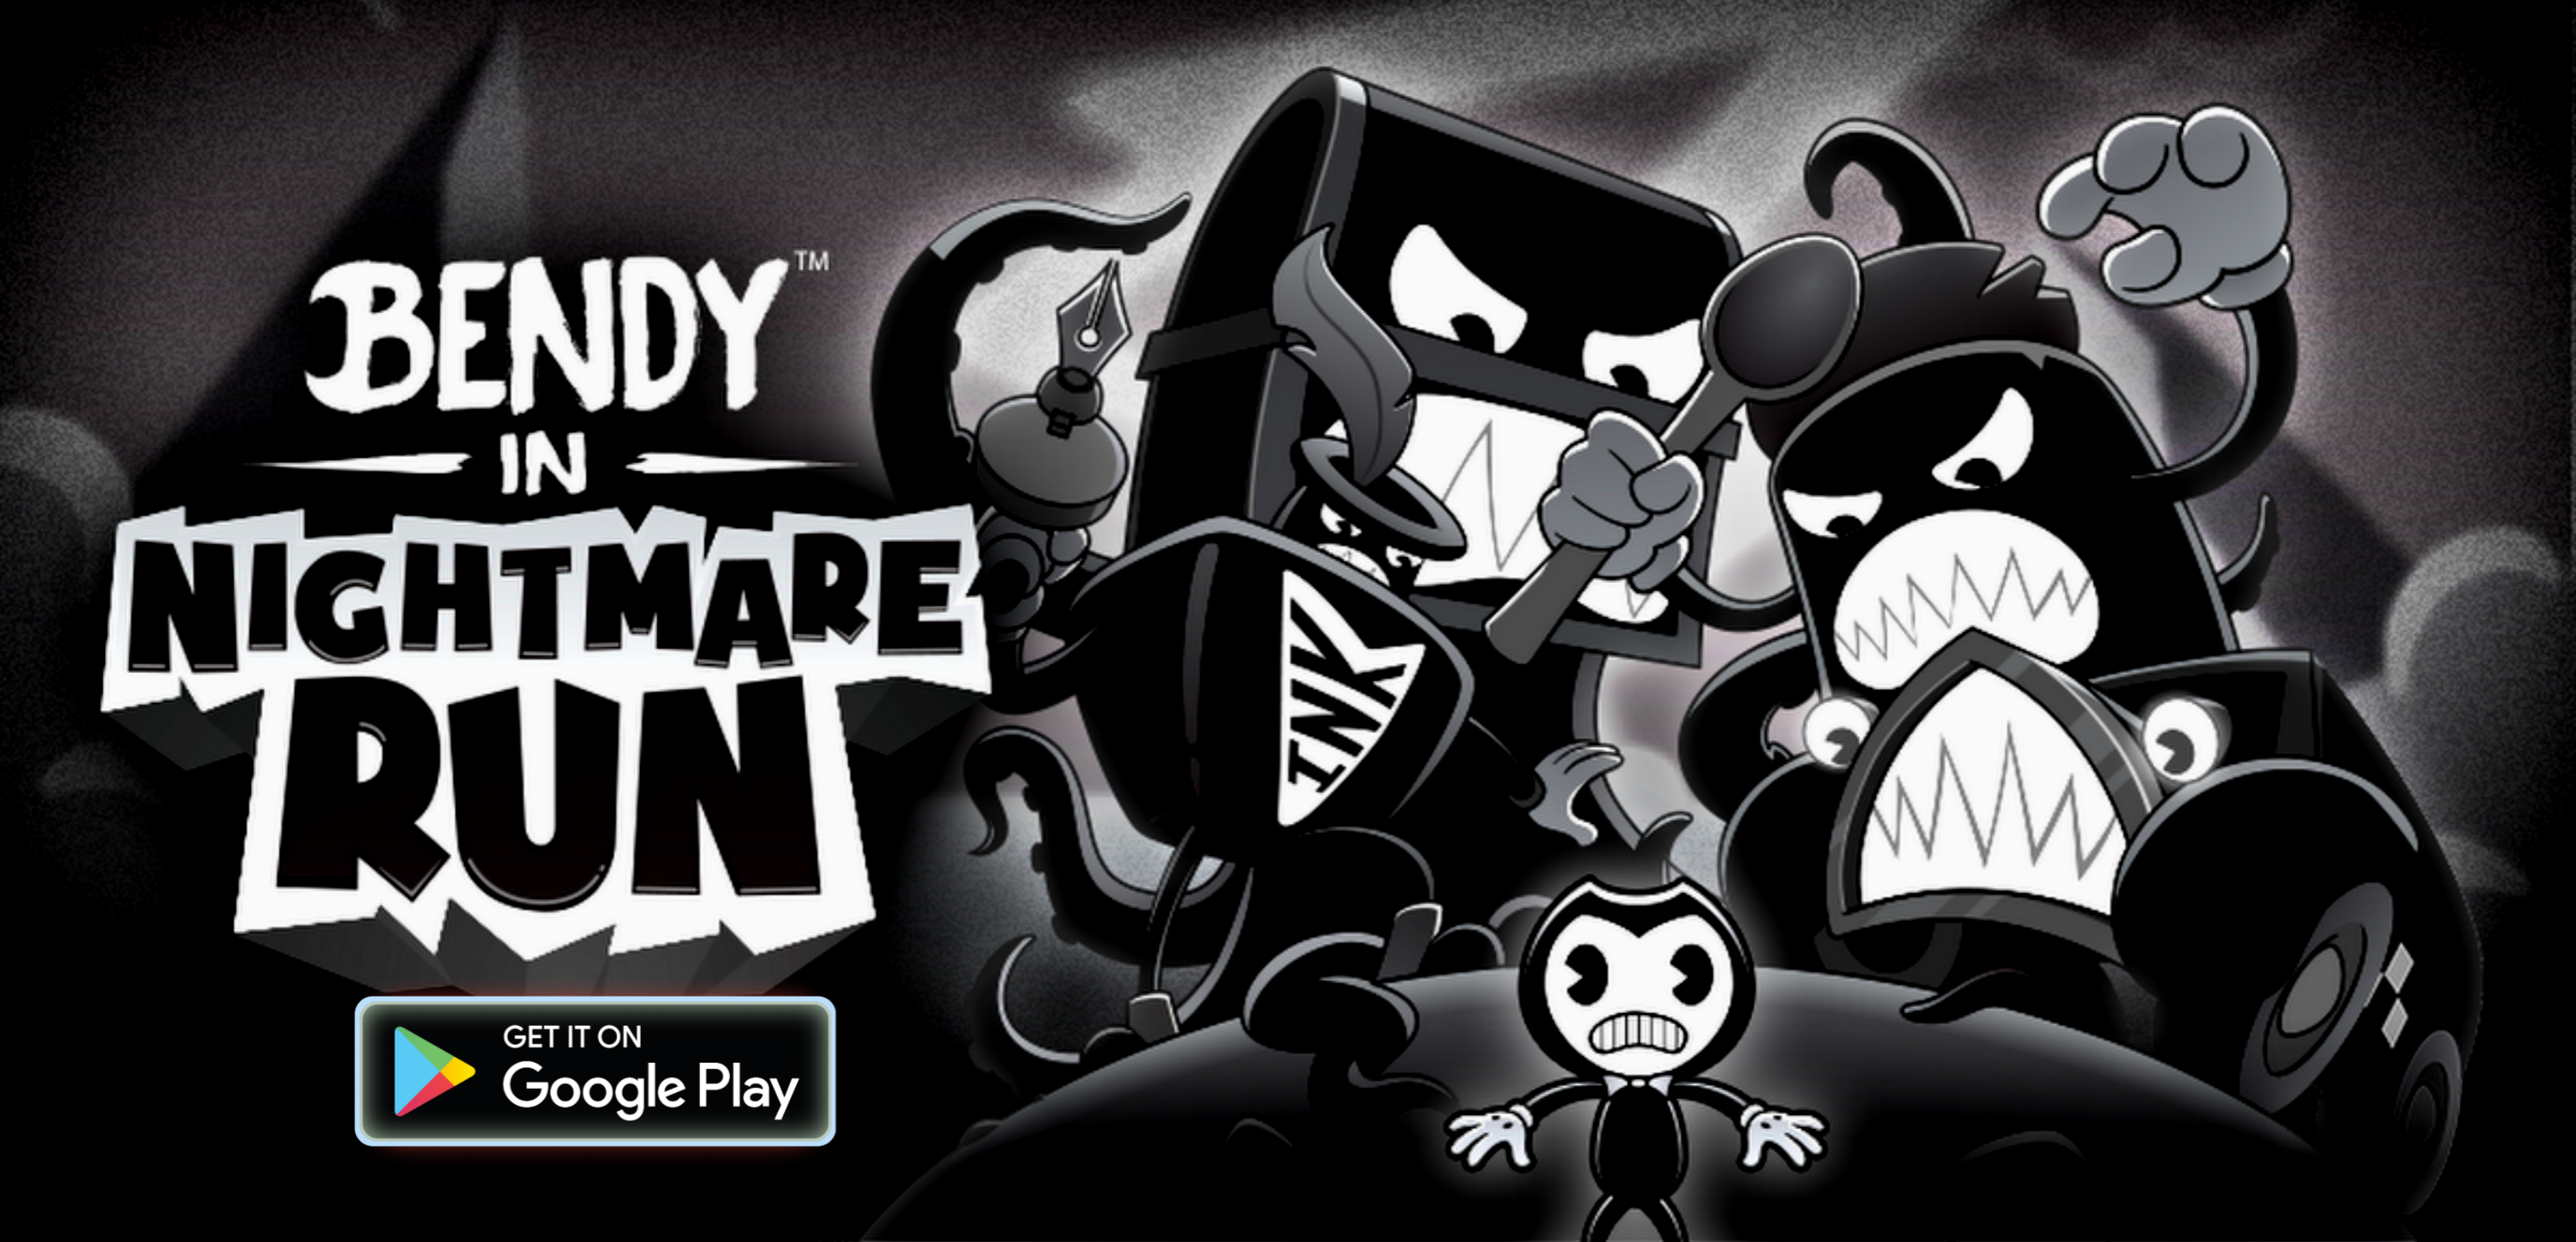 Cuphead-like Bendy in Nightmare Run is out now - Droid Gamers